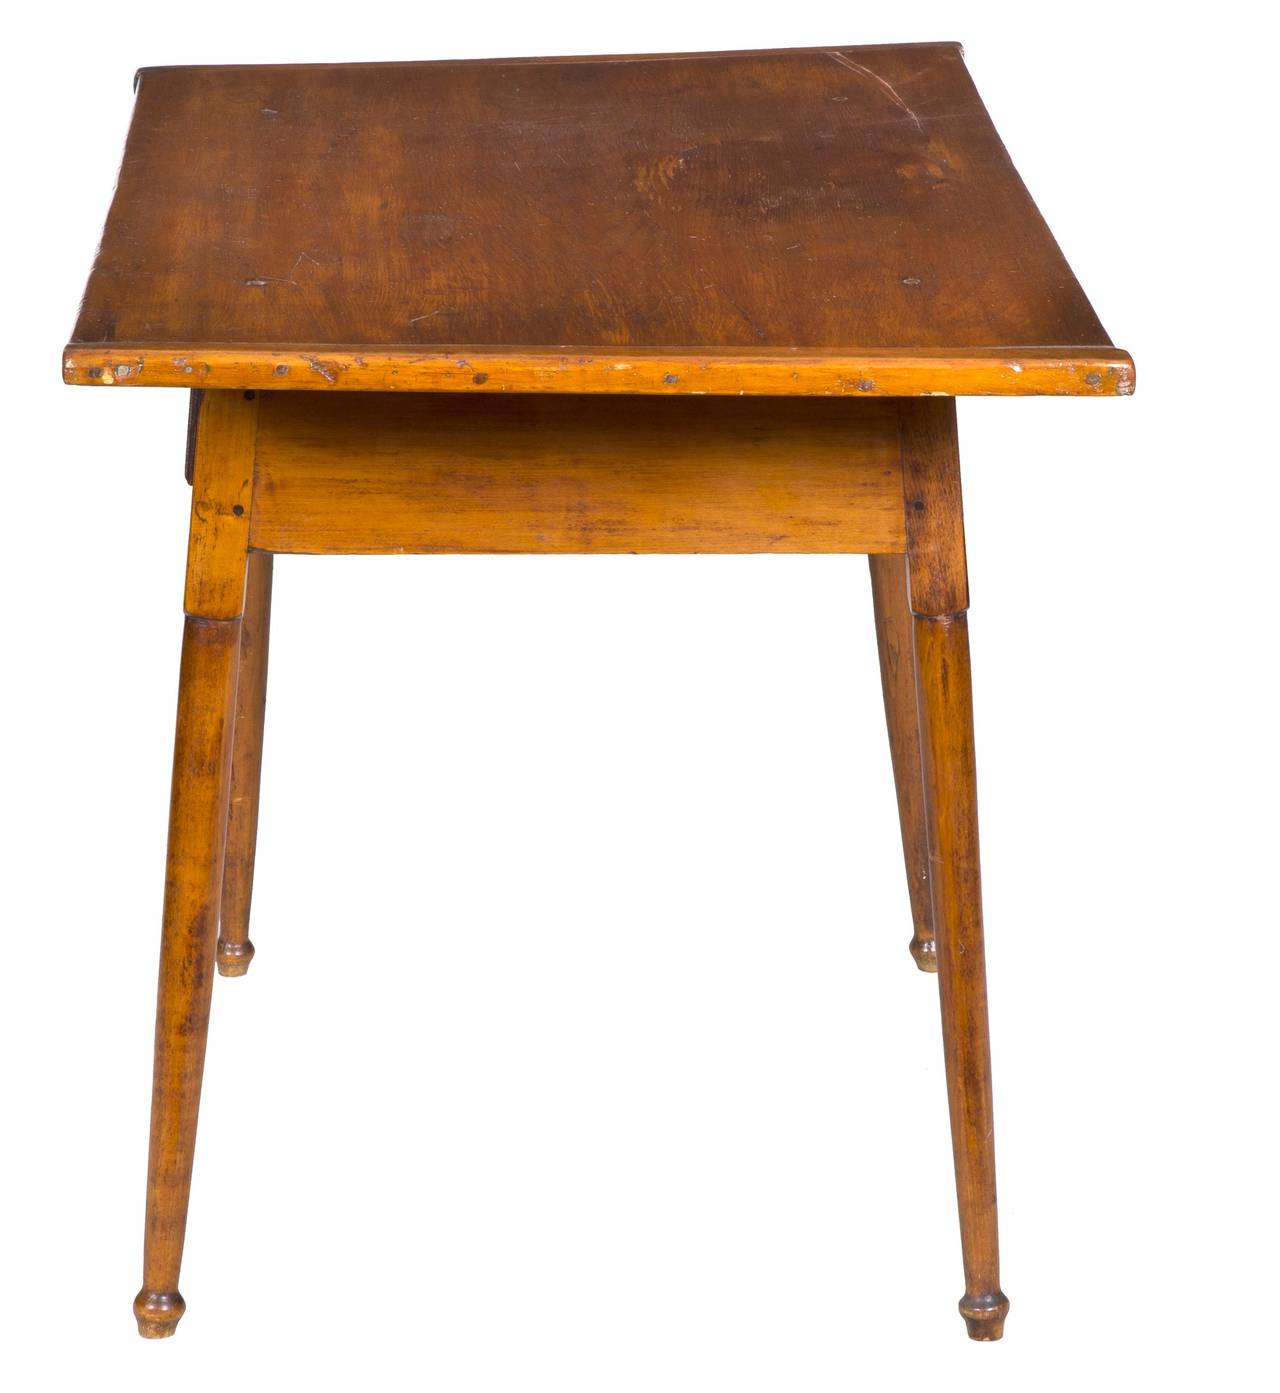 Rustic Maple Tavern Table Overhanging Rectangular Breadboard Top and Drawer, circa 1780 For Sale